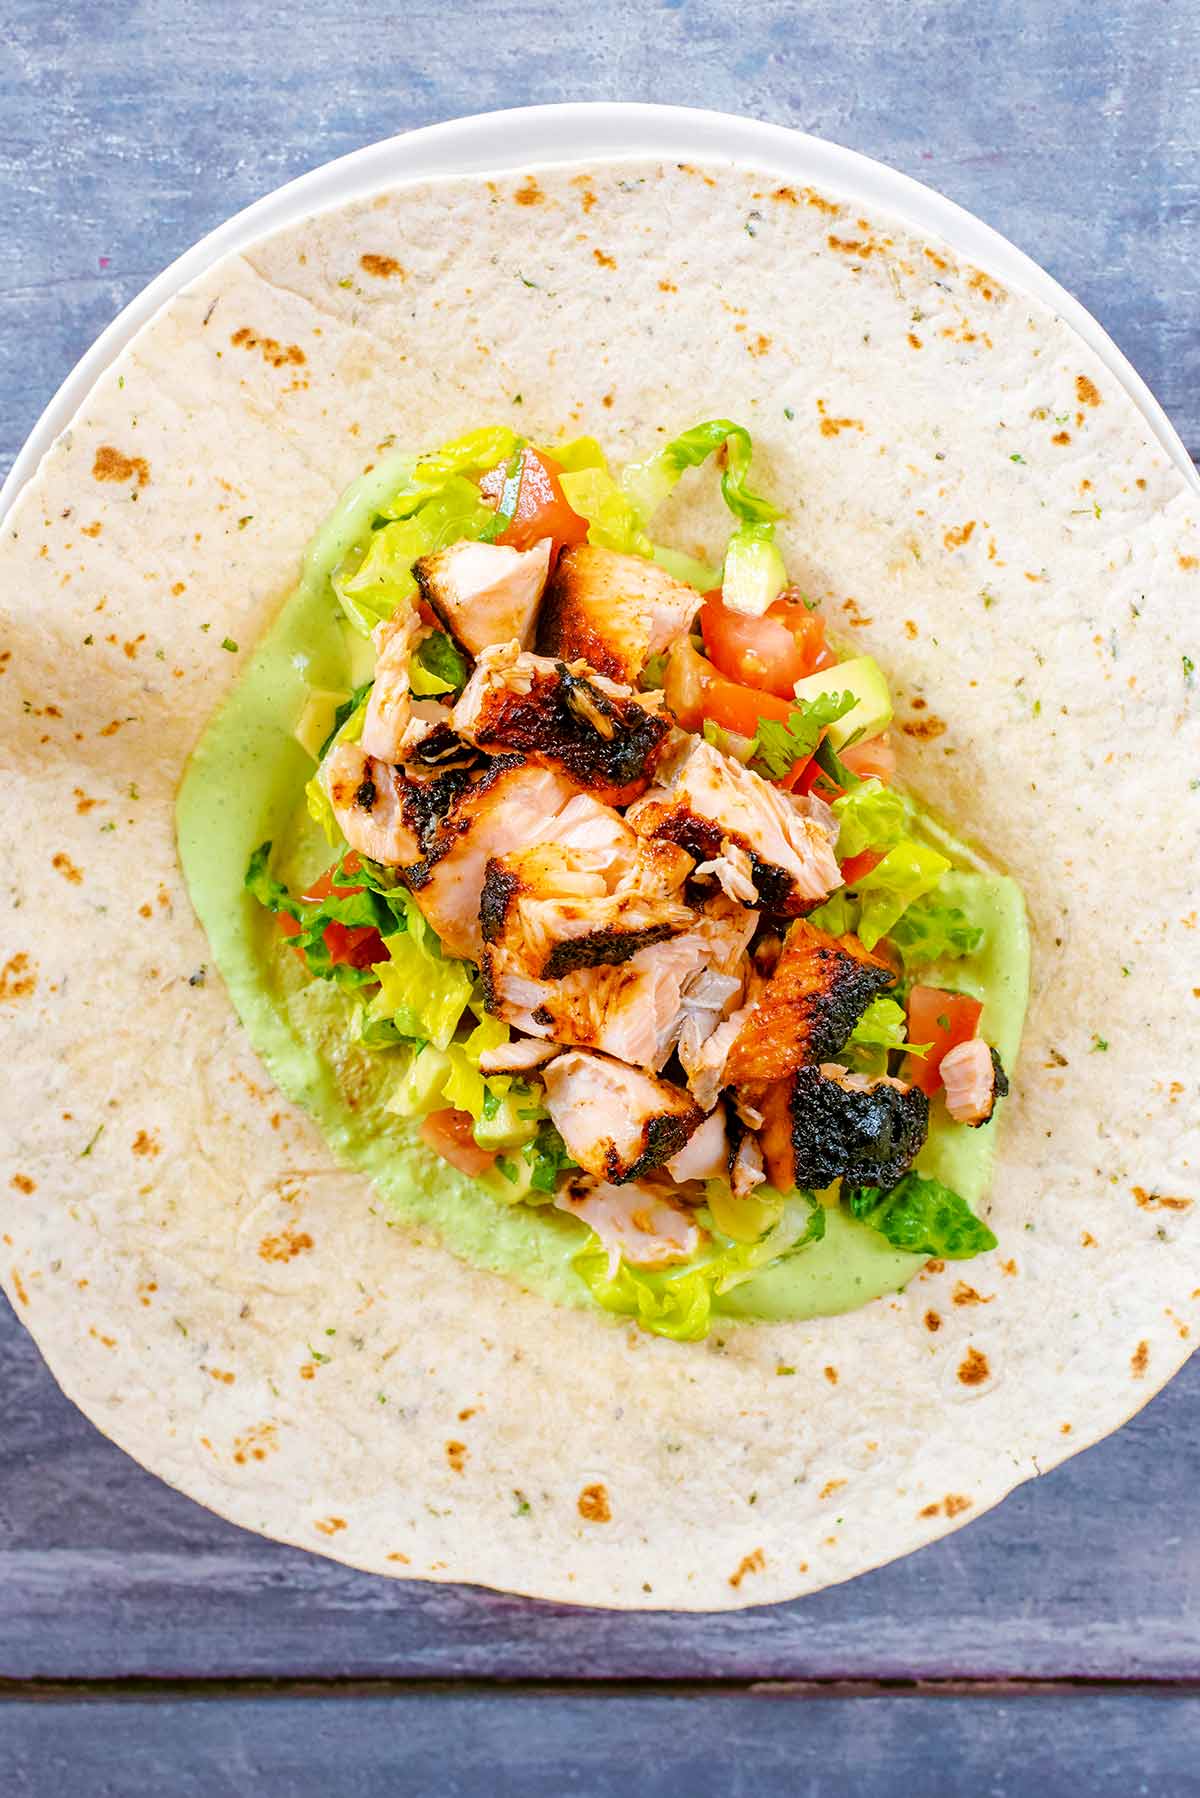 A tortilla wrap with green sauce, chopped salad and flaked salmon fillet.